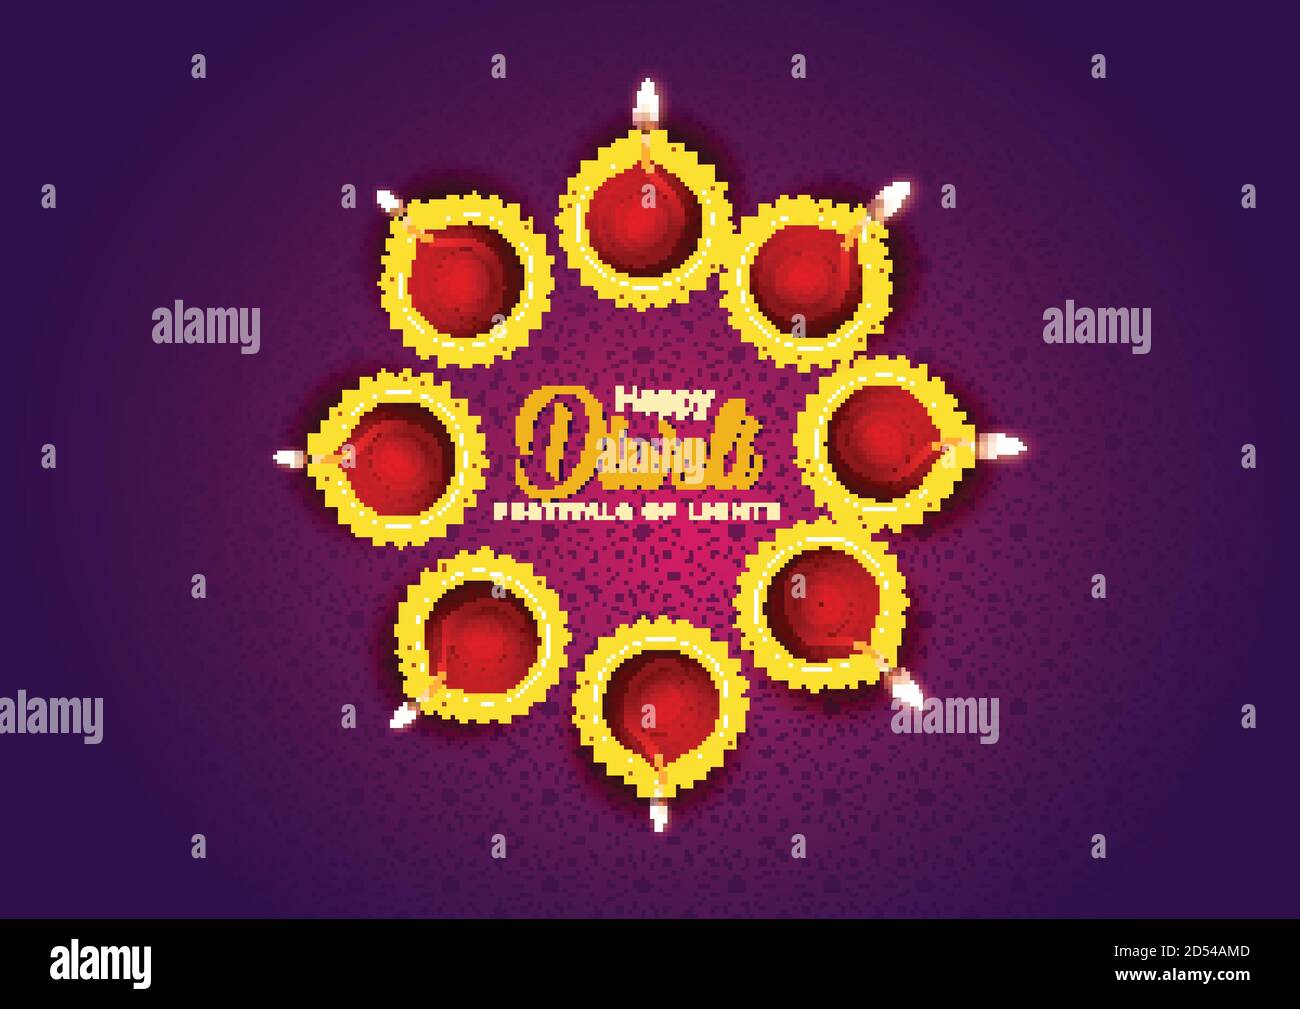 Happy Diwali celebration background. Top view of banner design decorated with illuminated oil lamps on patterned darkbackground. vector illustration Stock Vector